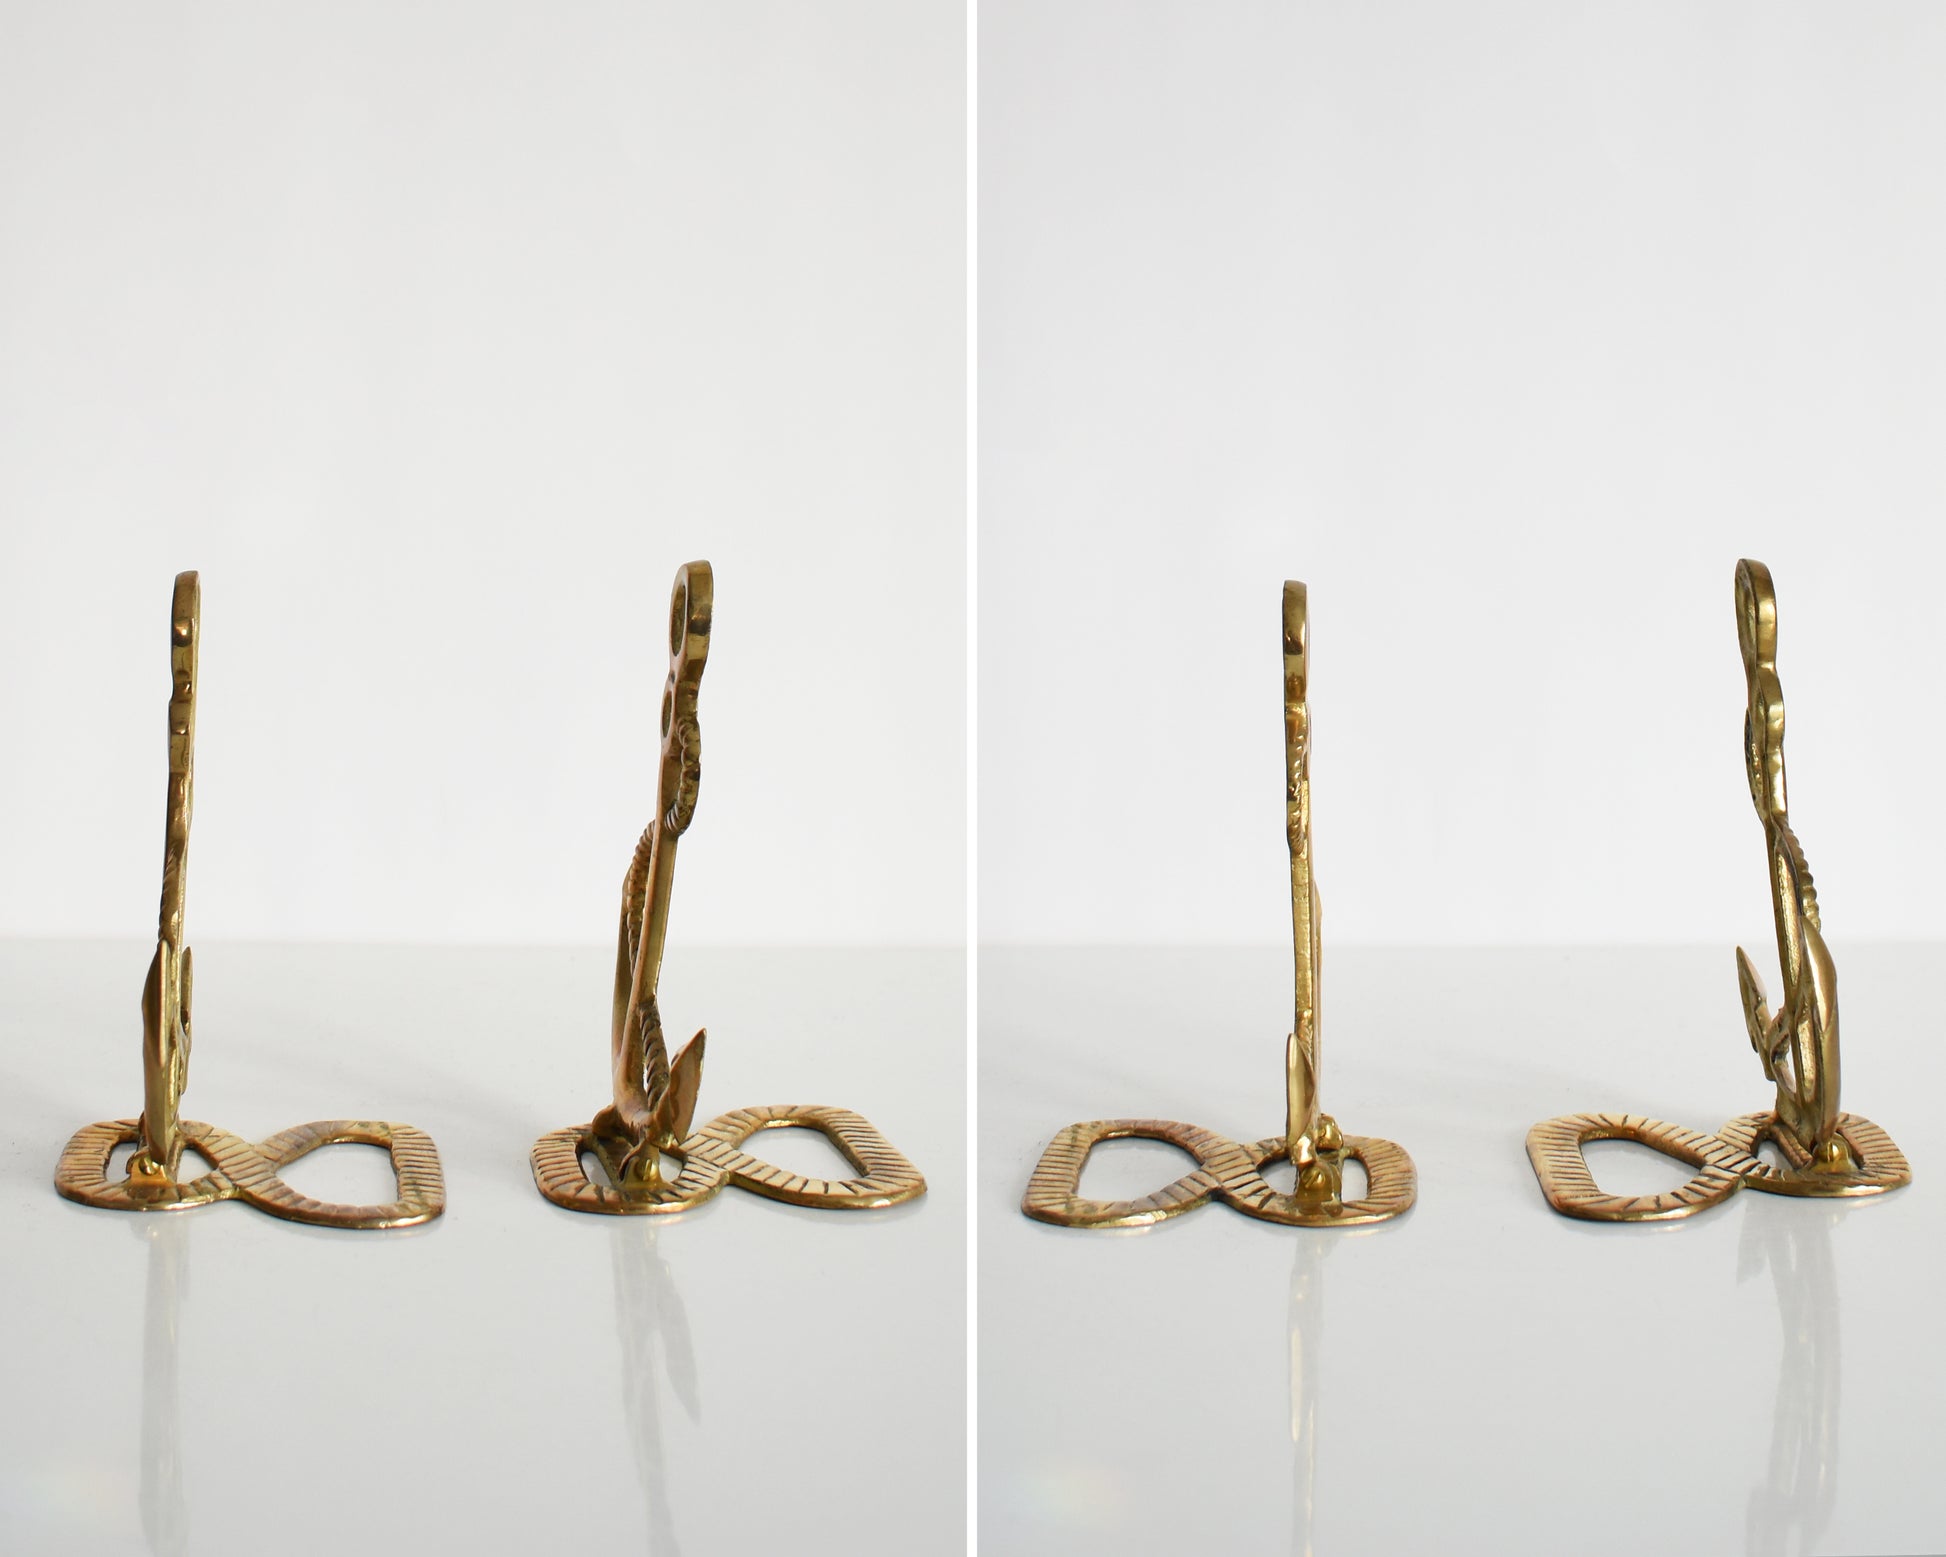 Side by side views of two vintage brass anchor and rope bookends.